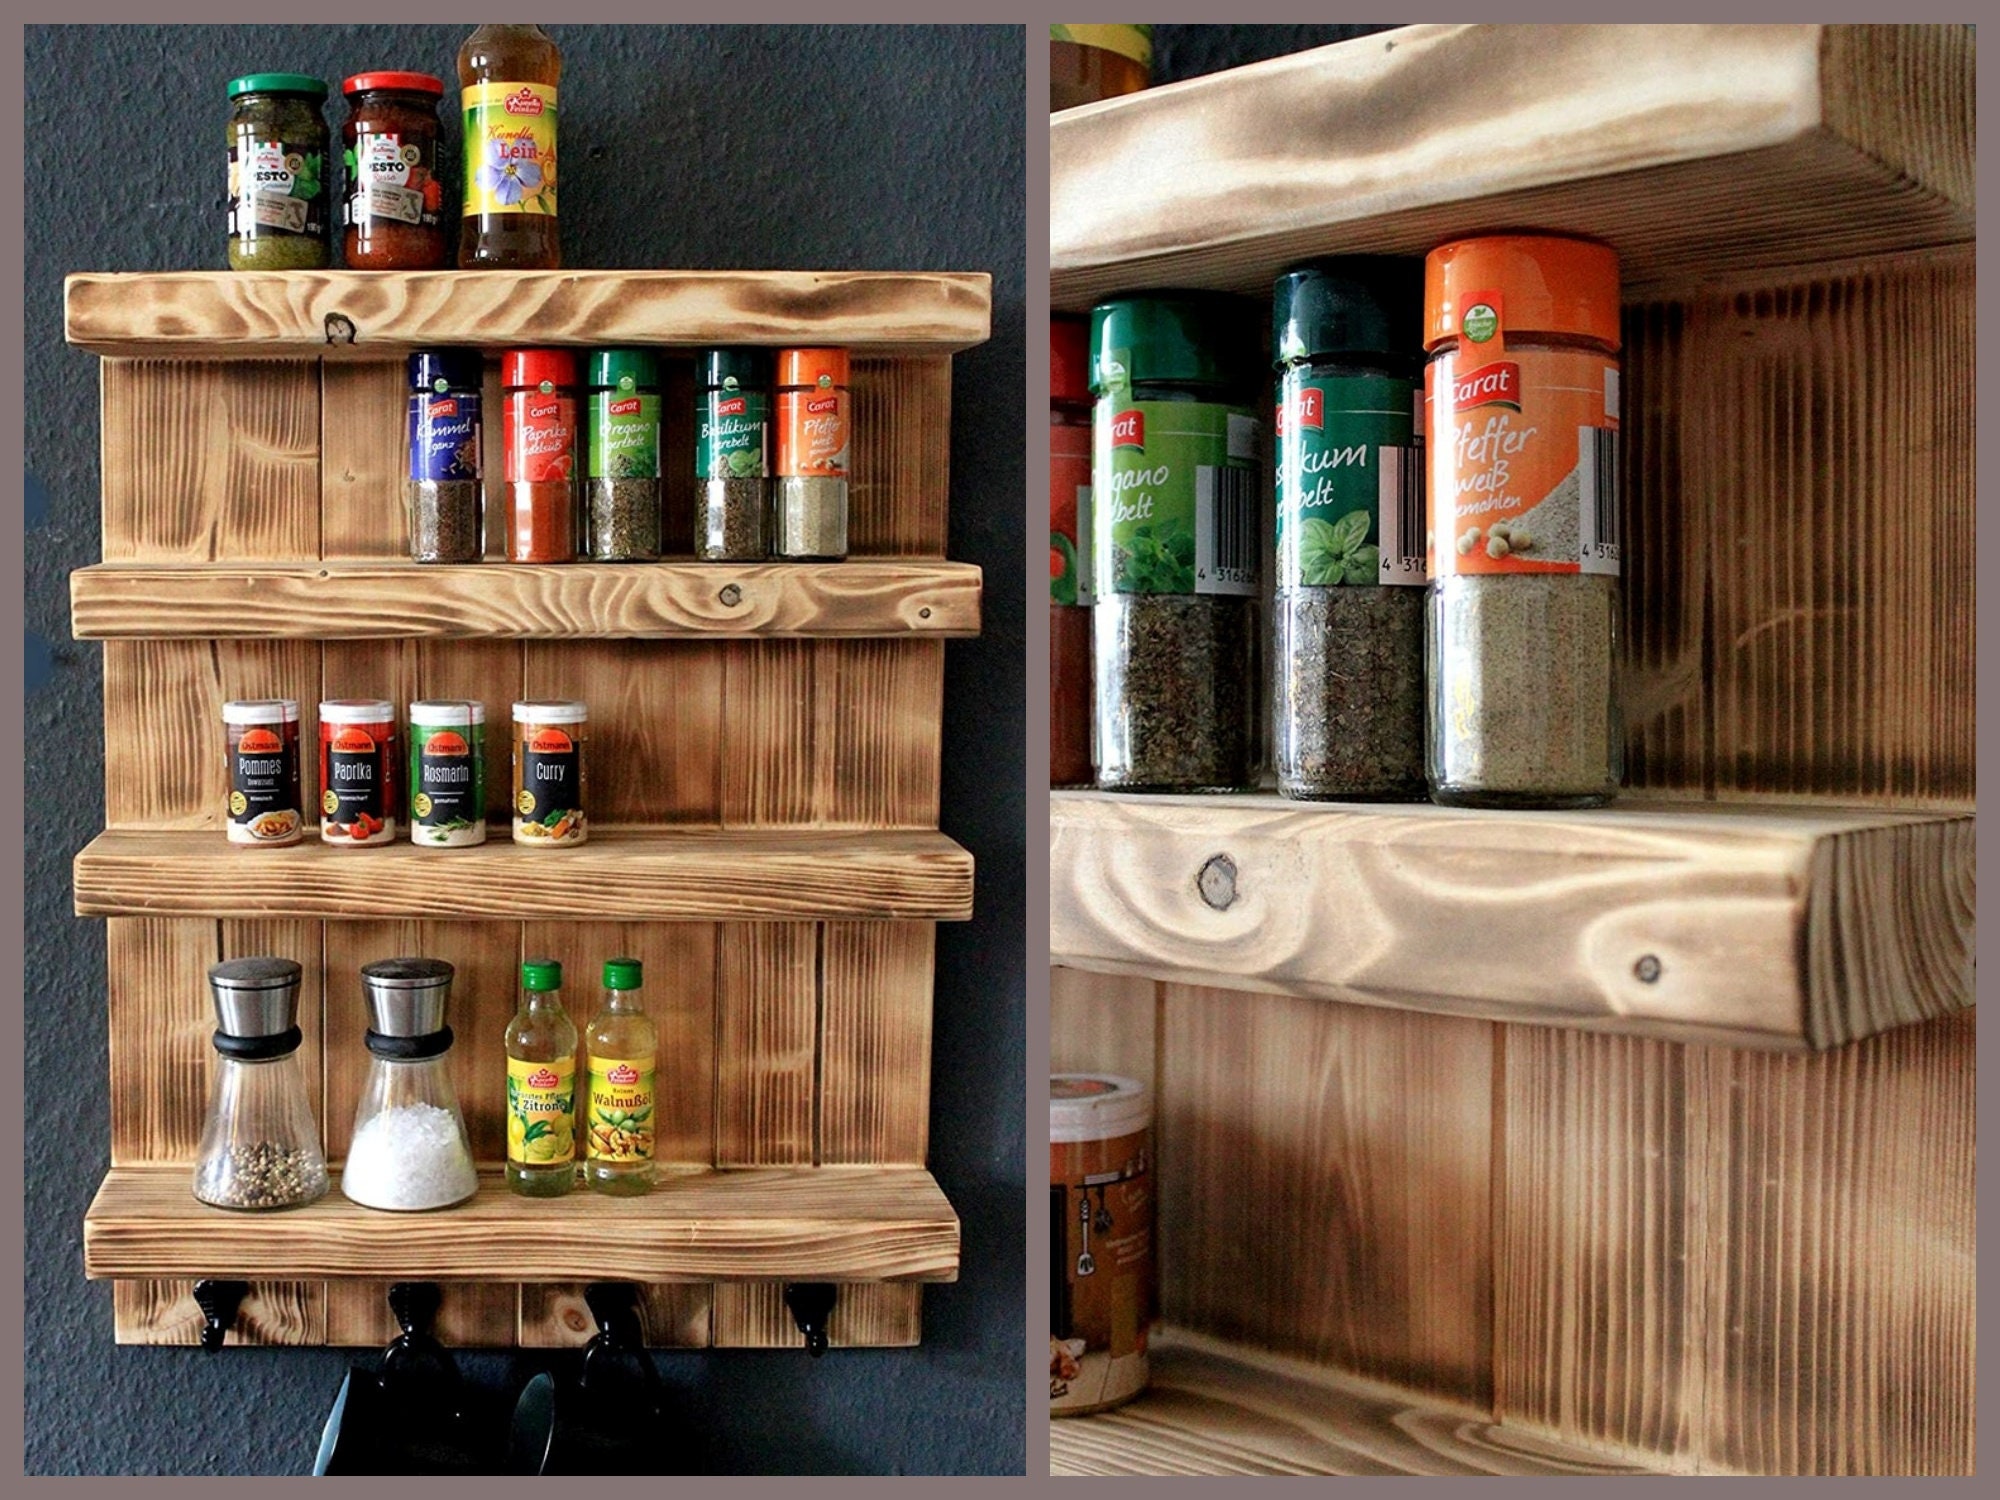 Spice rack that I turned into an art supplies storage. : r